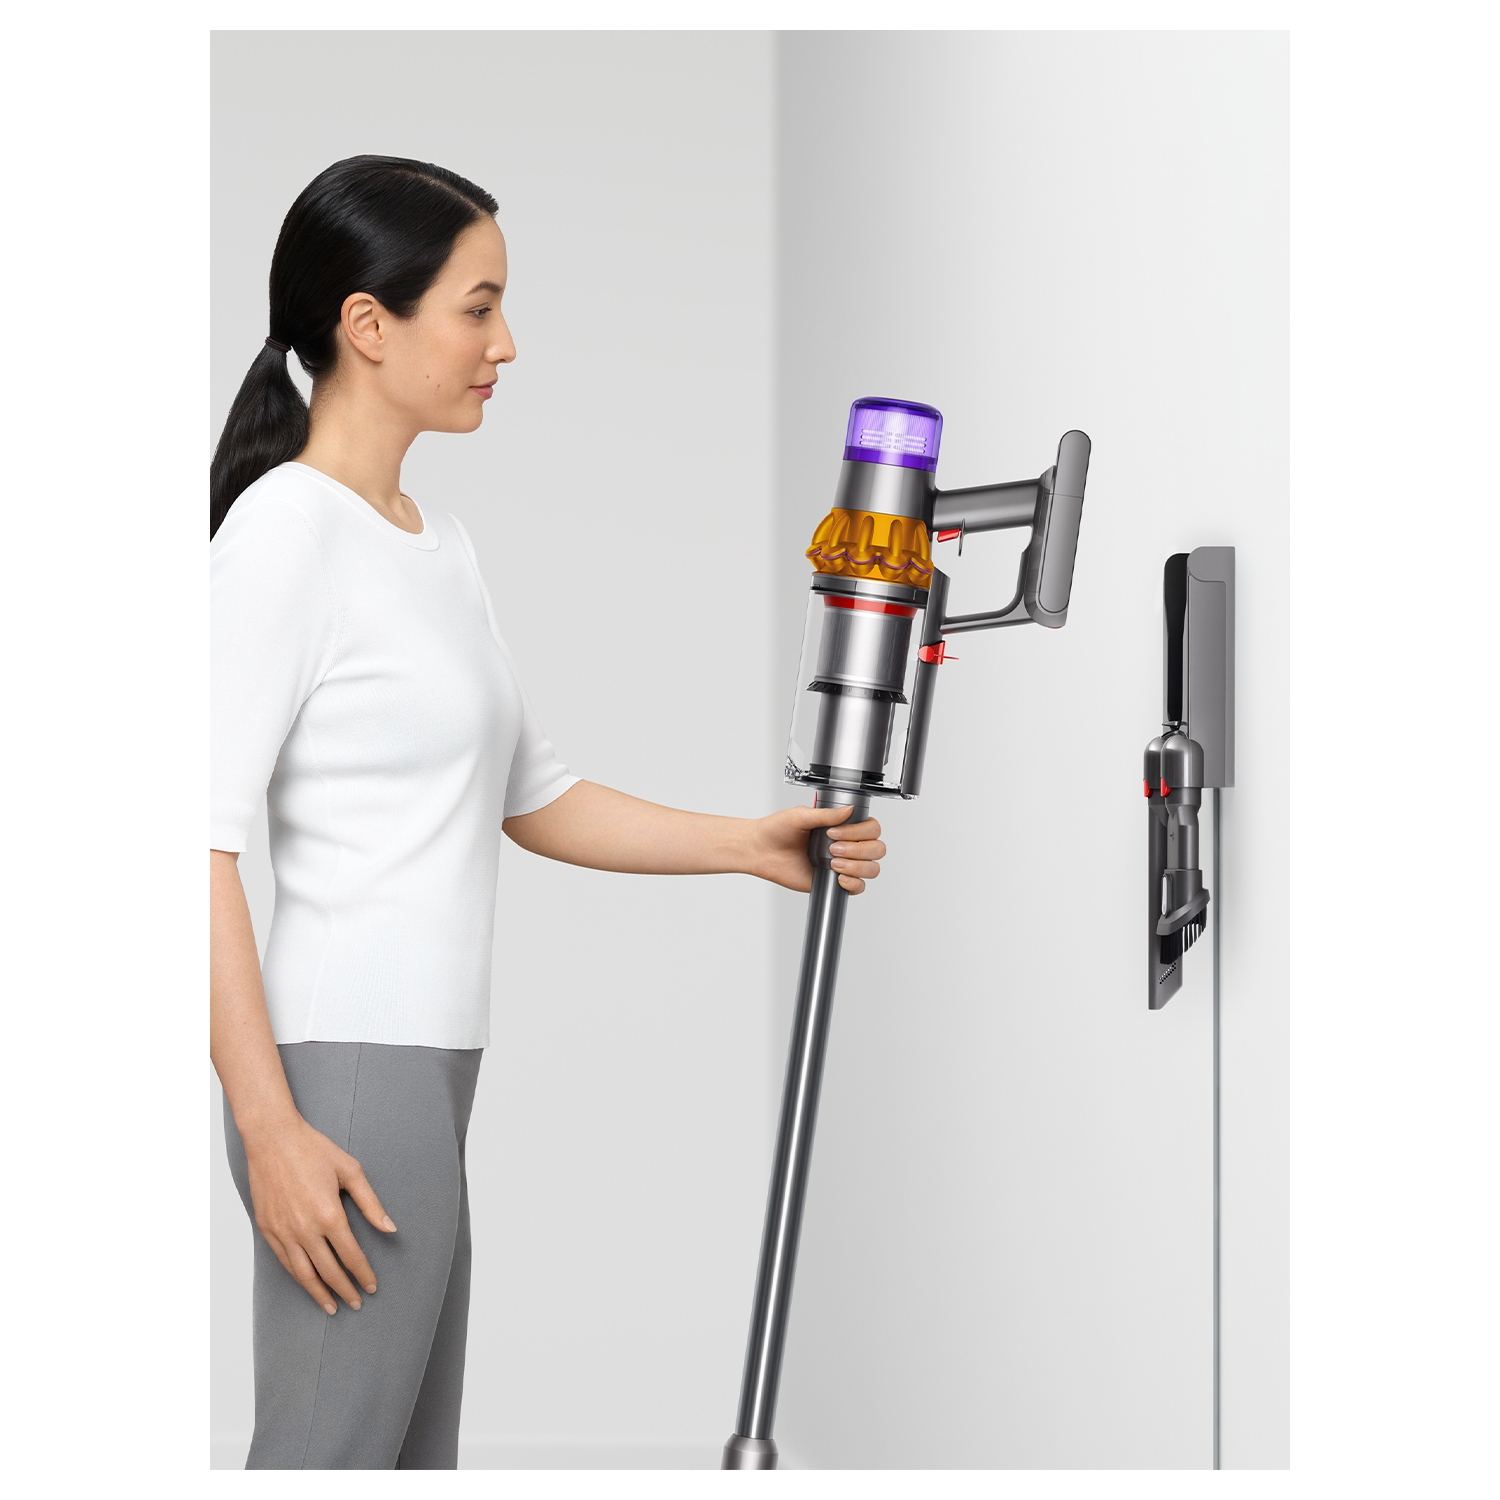 Dyson V15 Detect Absolute Cordless Stick Cleaner - 60 Minute Run Time - 1